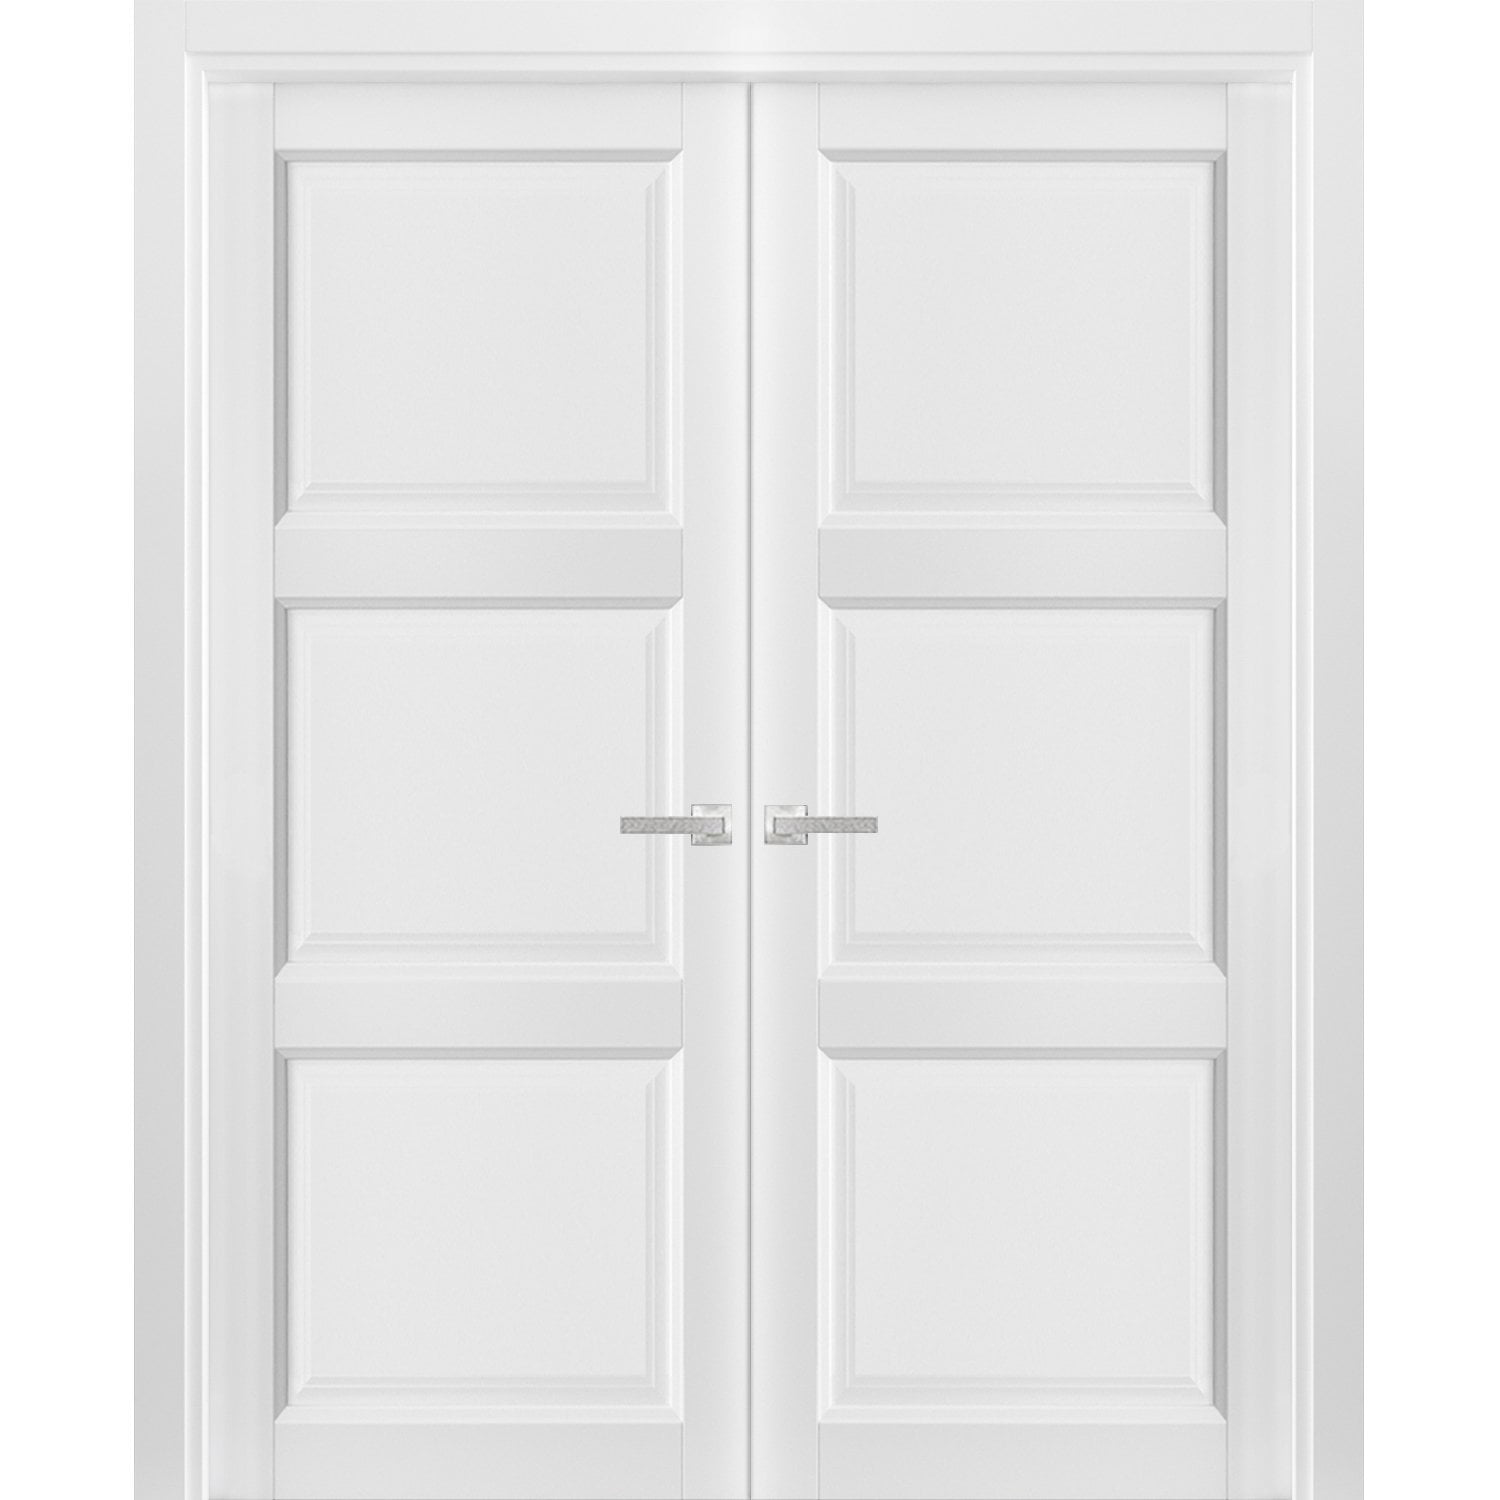 Solid French Double Doors 60 x 80 inches - Walmart.com